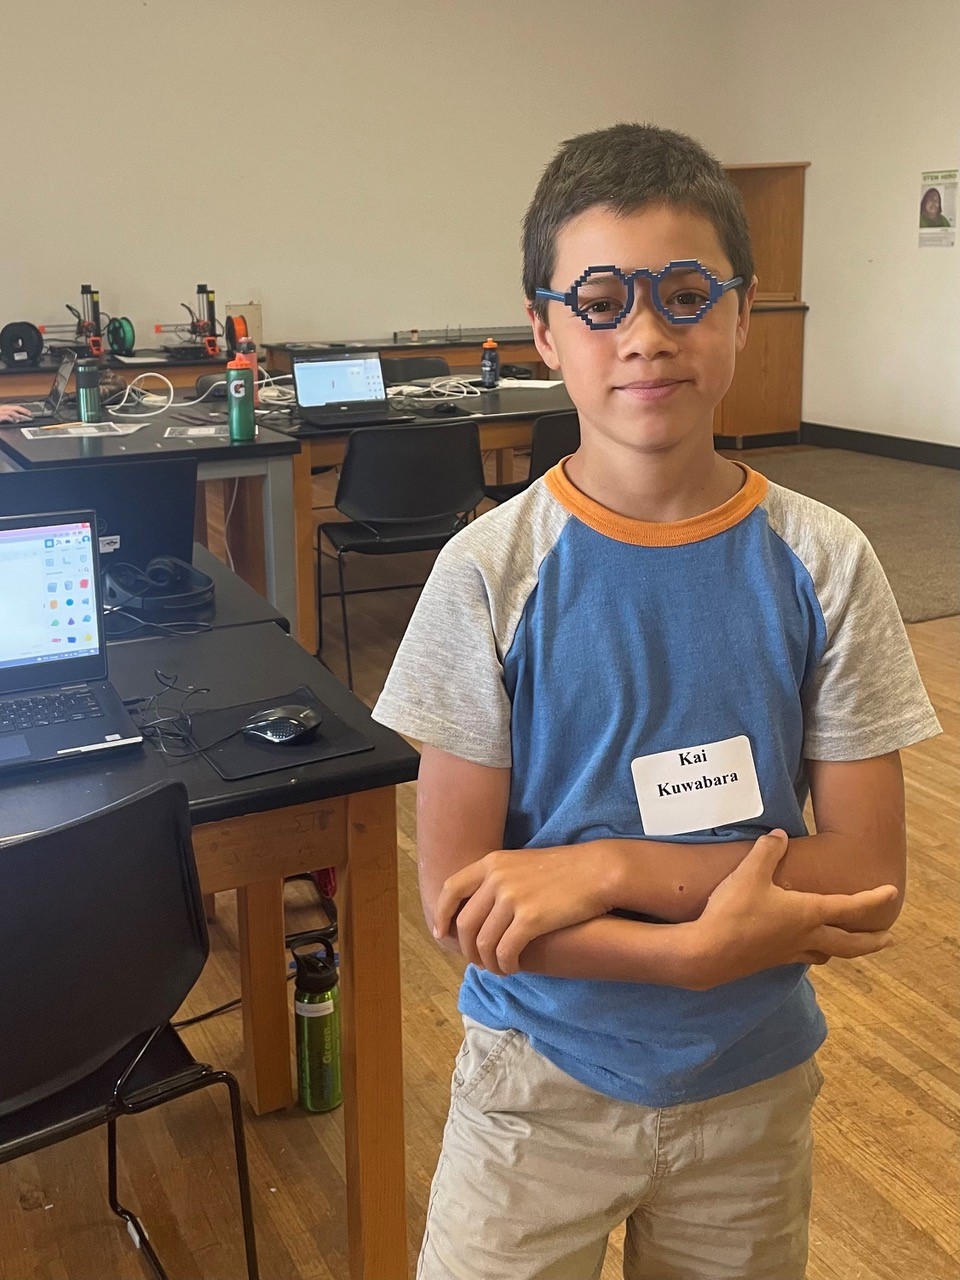 Kai Kuwabara wears the eyeglasses he made at SCORE’s introductory 3D printing and design camp.